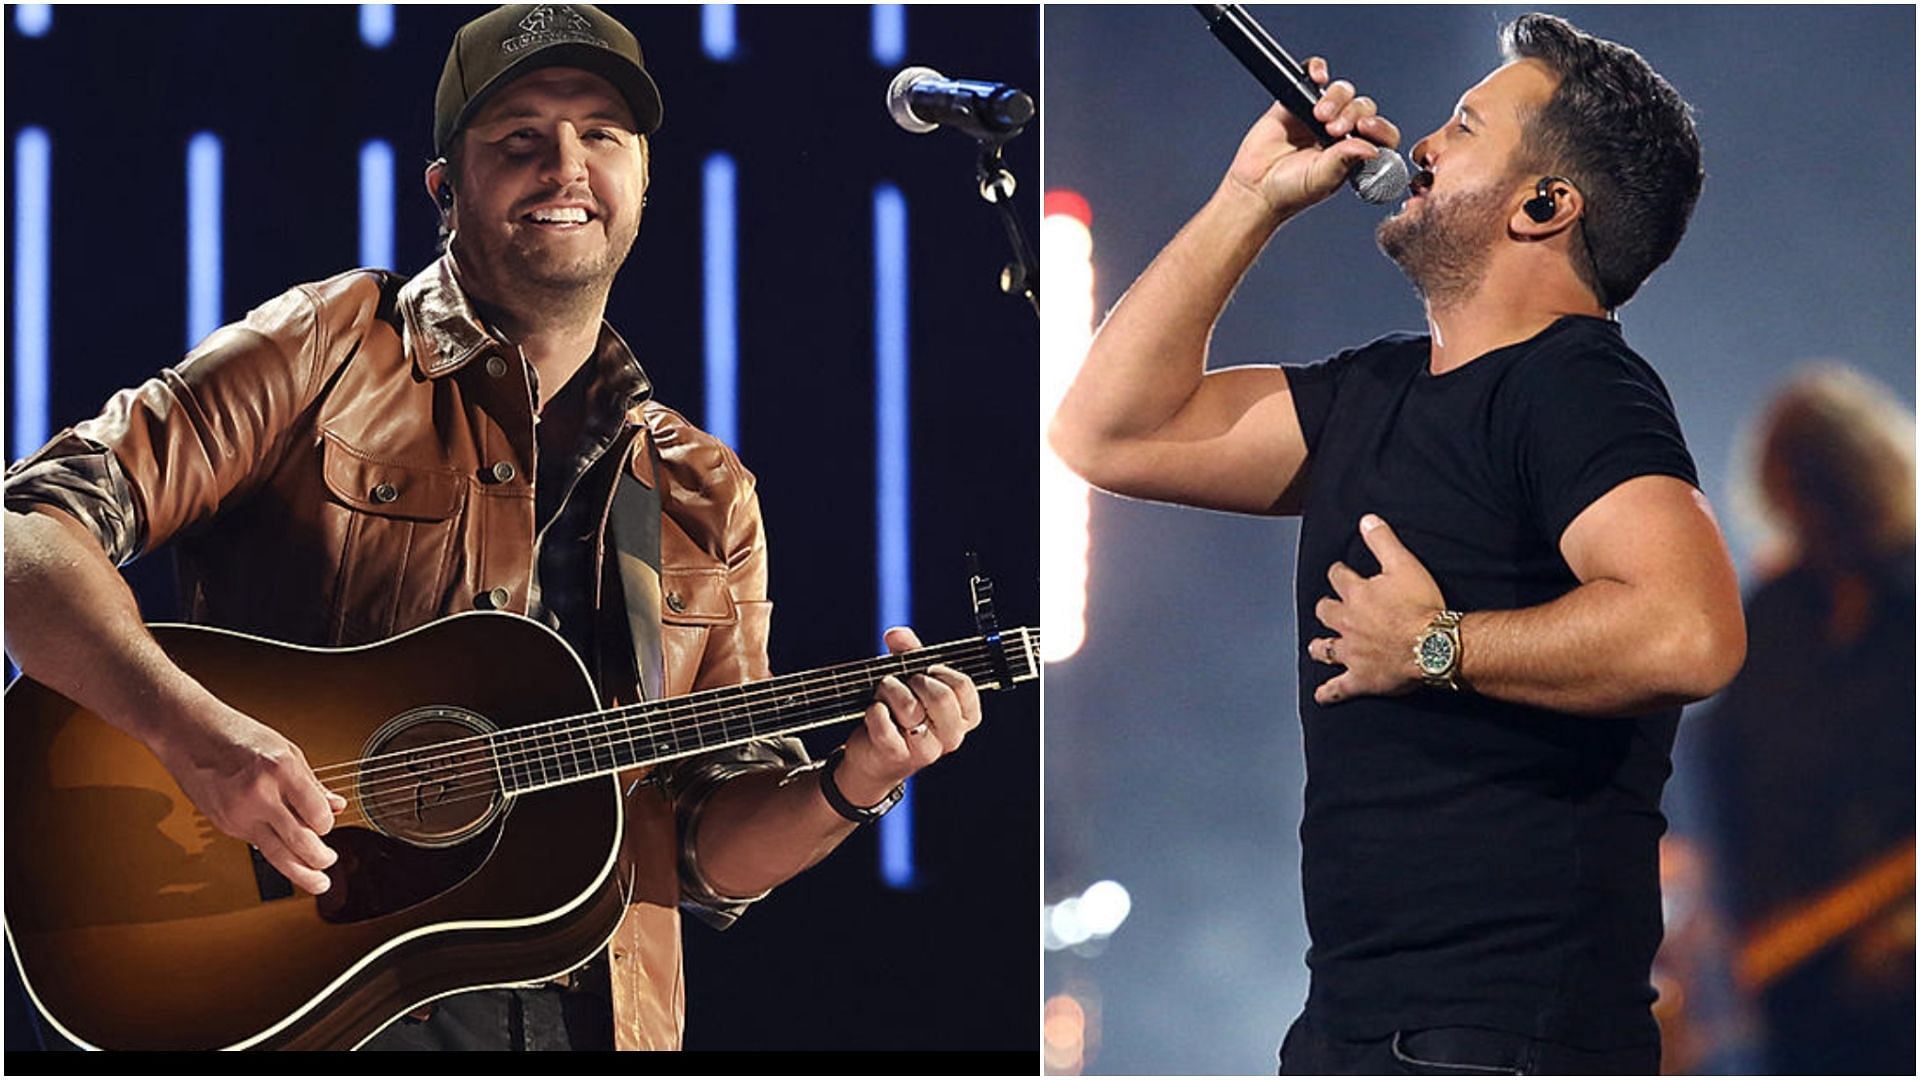 Luke Bryan has announced his 2023 North American tour dates. (Images via Getty)